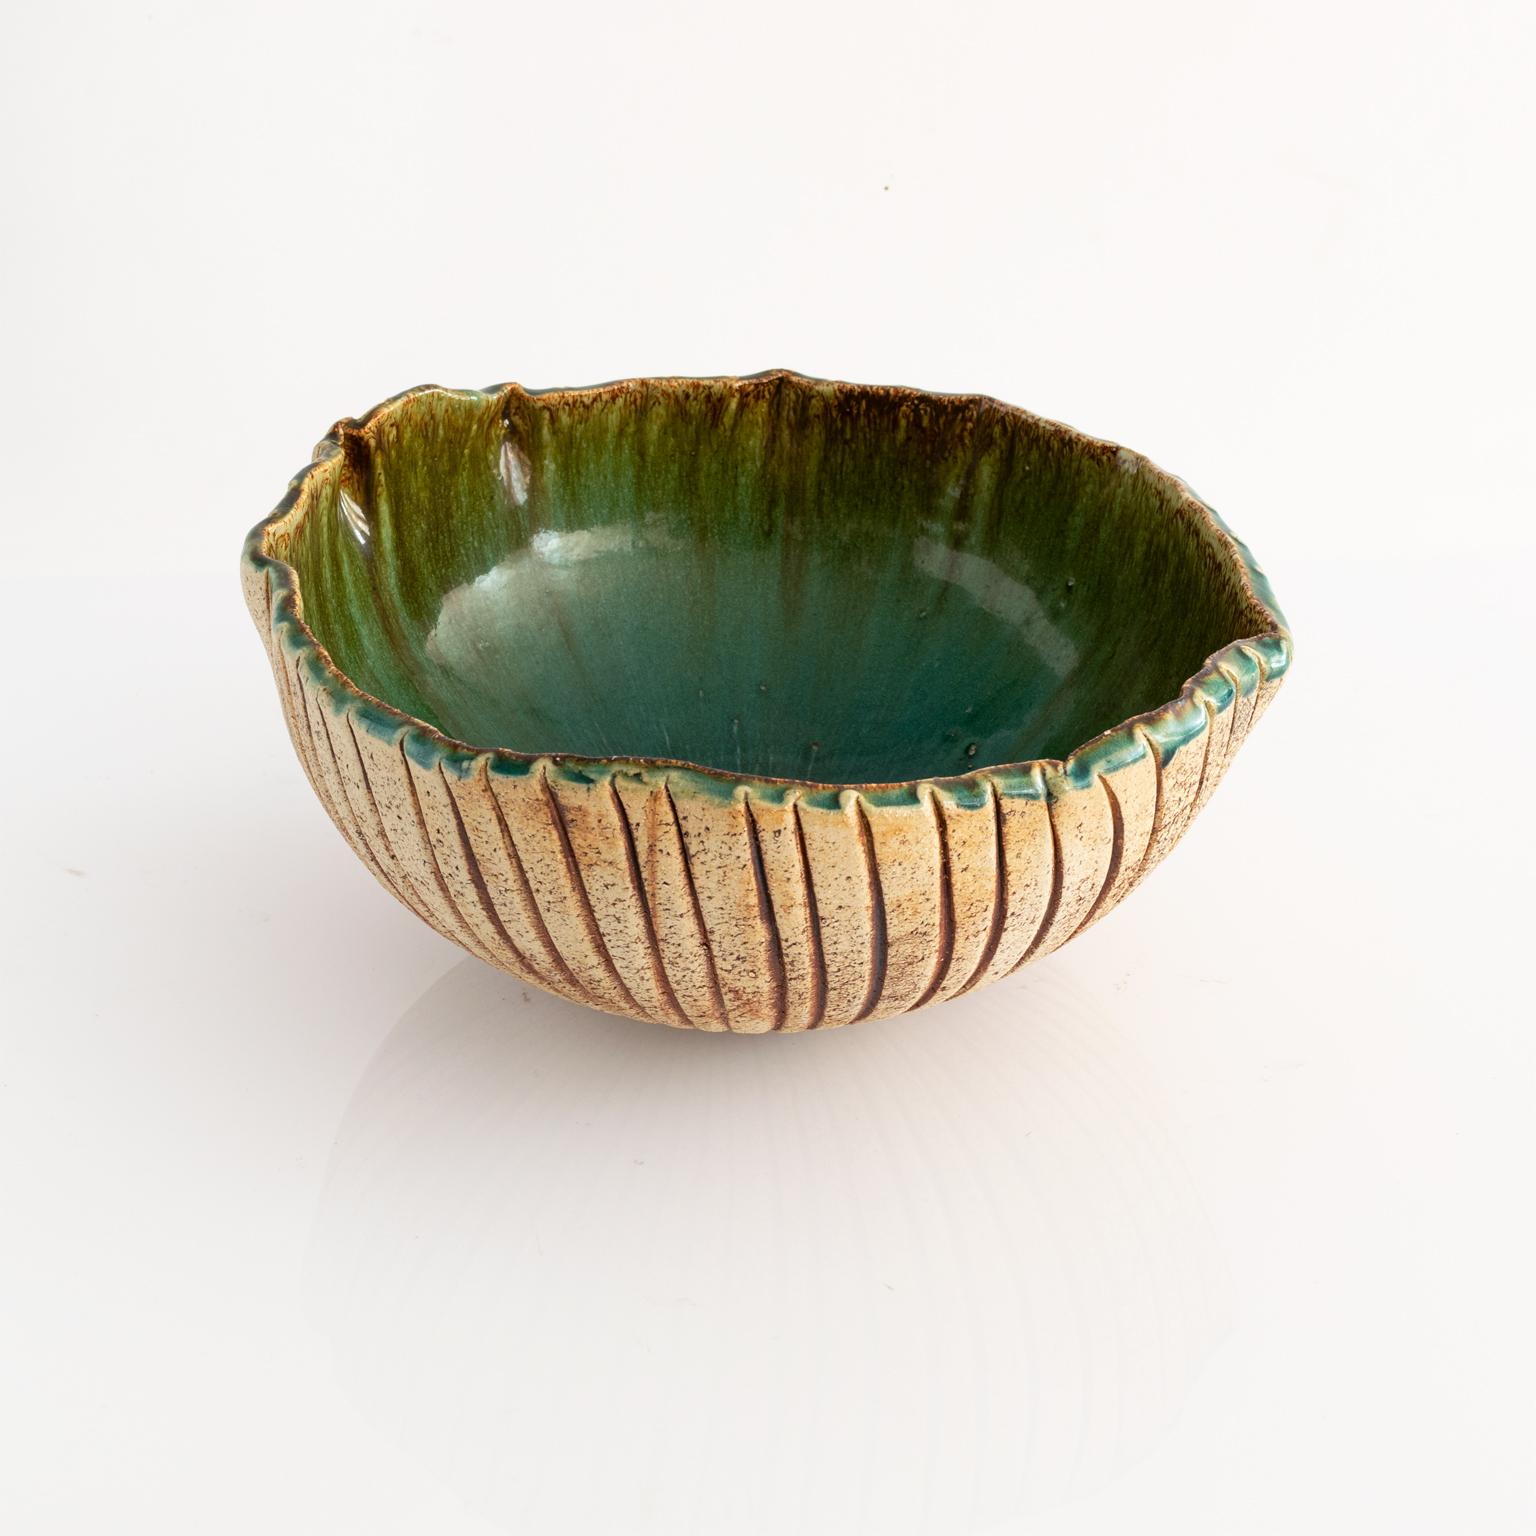 Unique hand built ceramic bowl by Bengt Berglund with a molded green glaze on the interior and brown grooves on the exterior side. Made by Gustavsterg, Sweden, circa 1960s.

Measures: Diameter 11